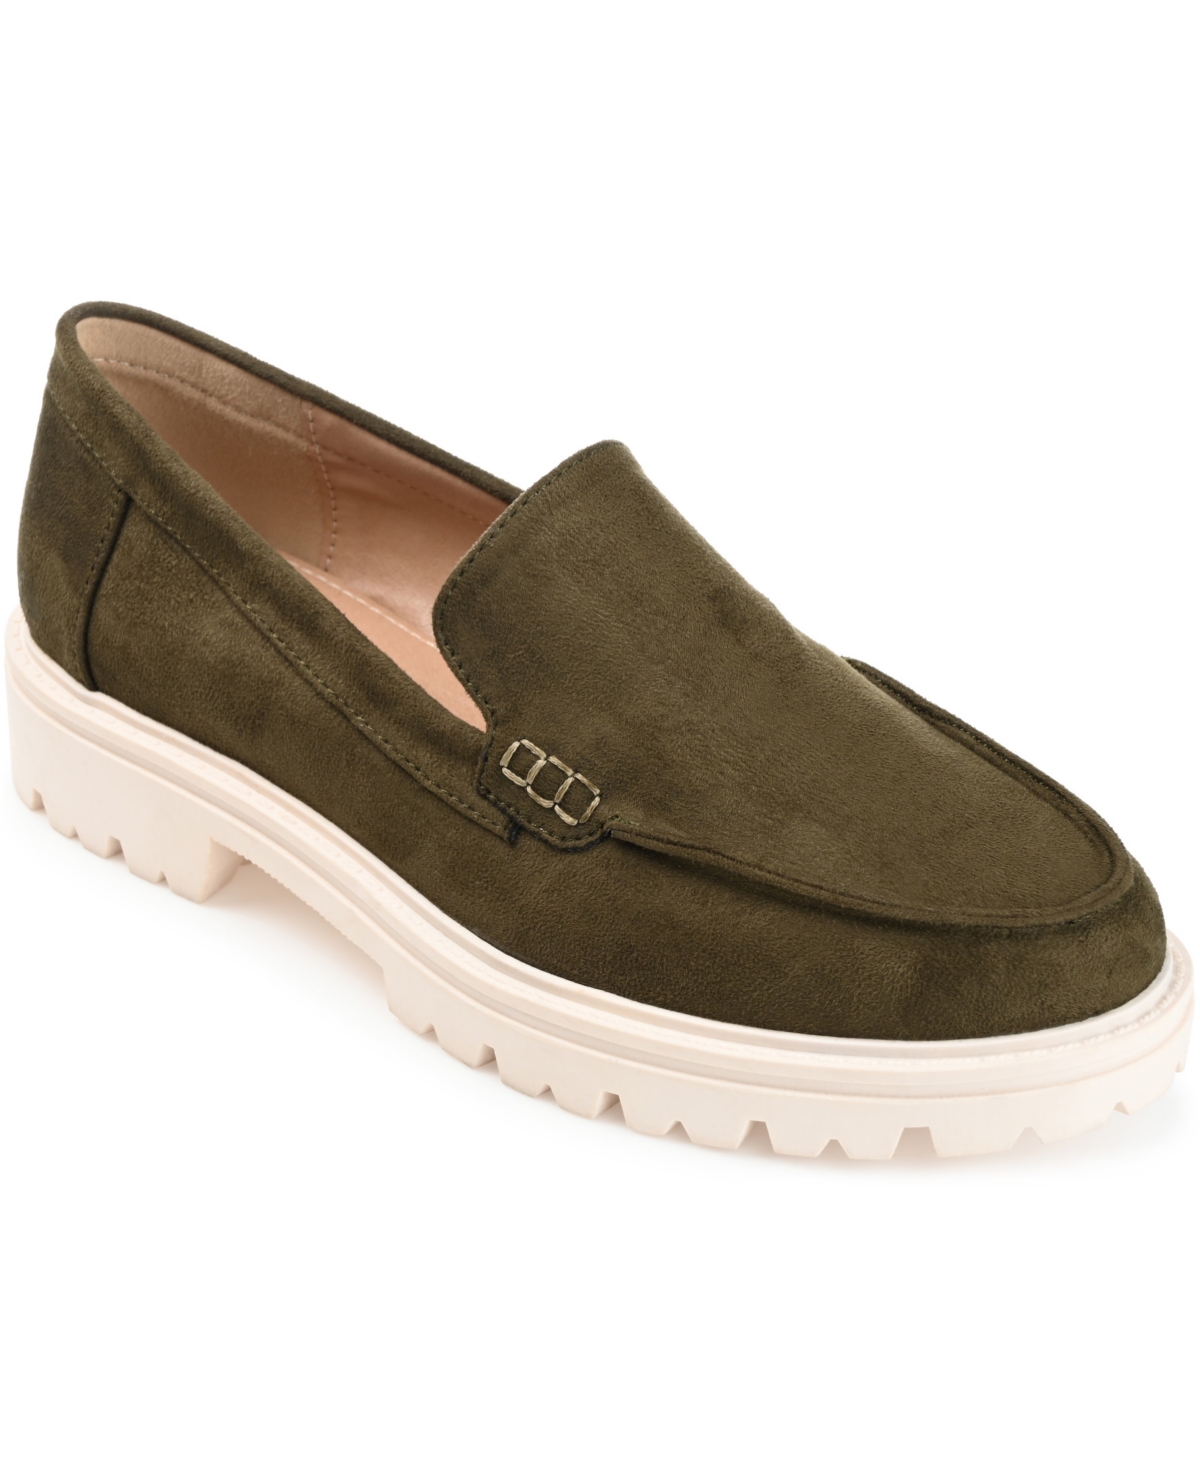 Women's Erika Lug Sole Loafers - Taupe